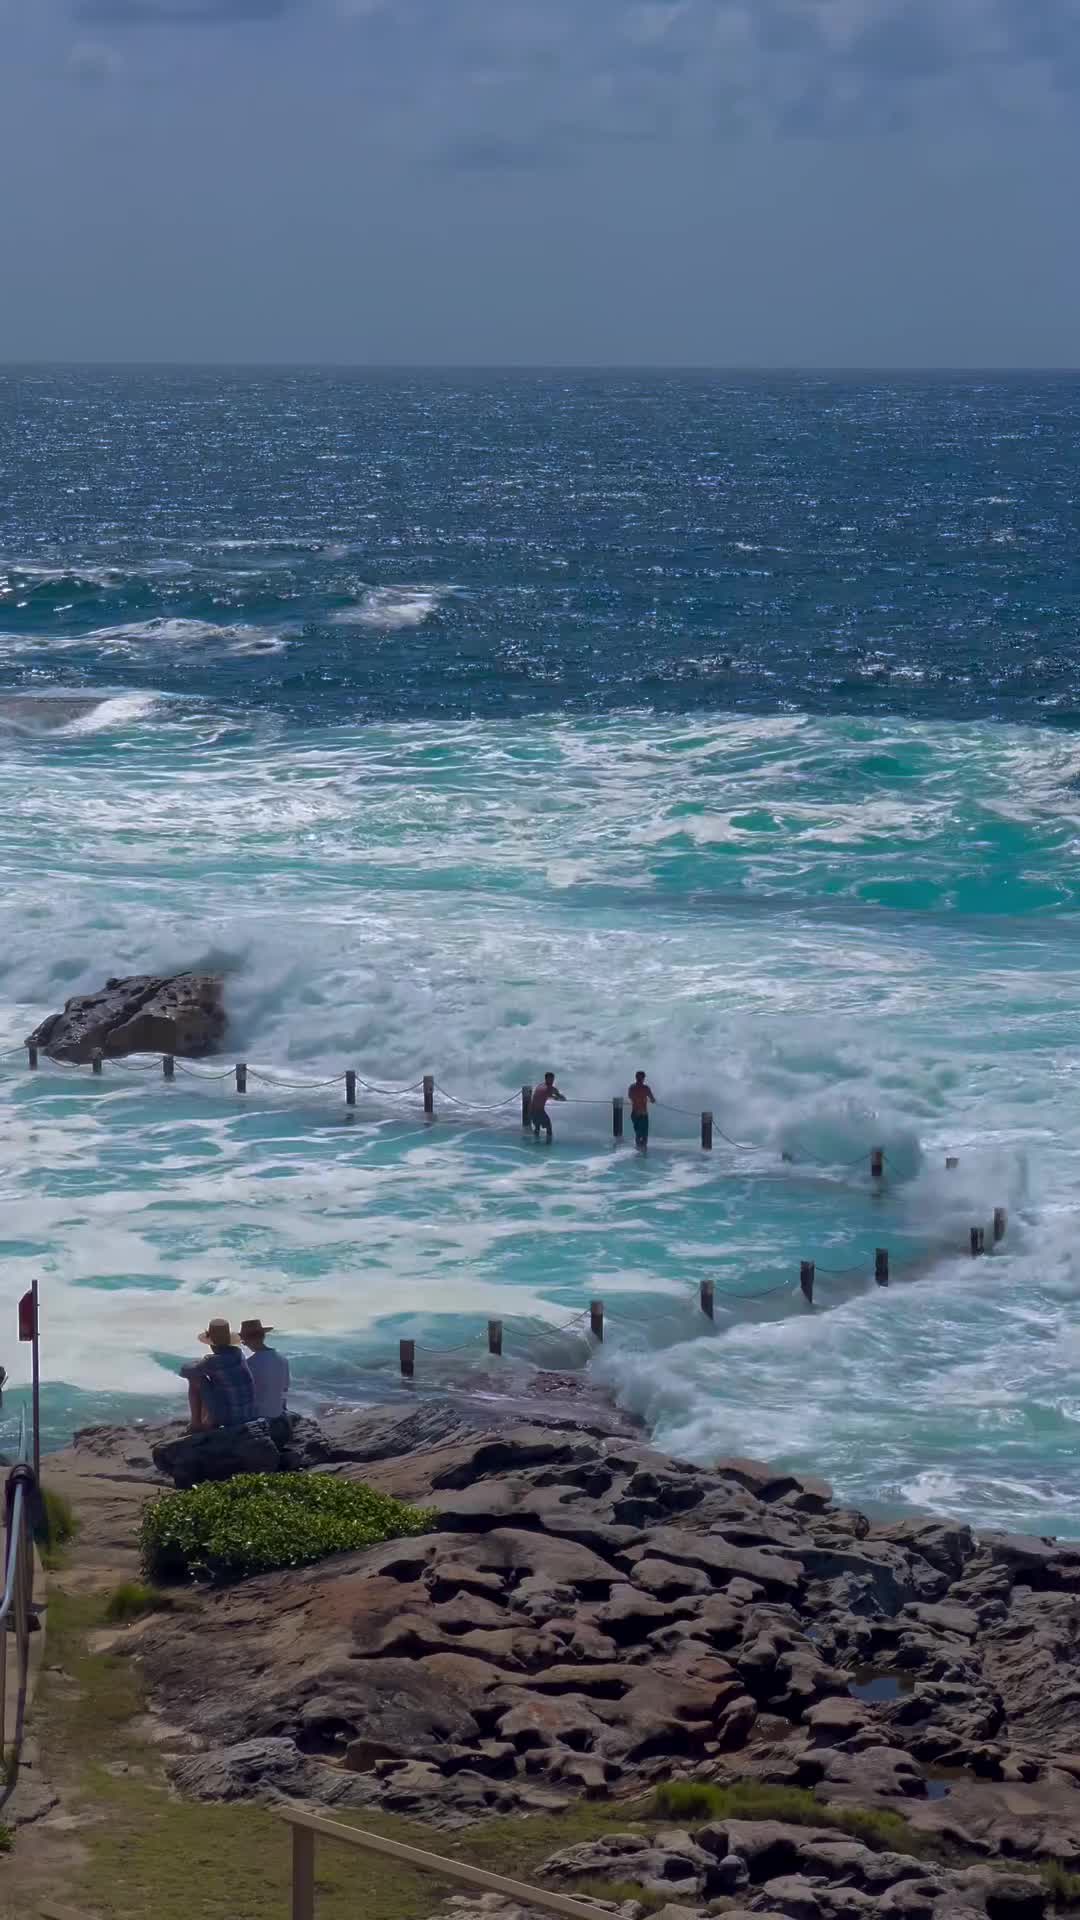 Thrill Seekers Brave Big Swell at Mahon Pool, Maroubra